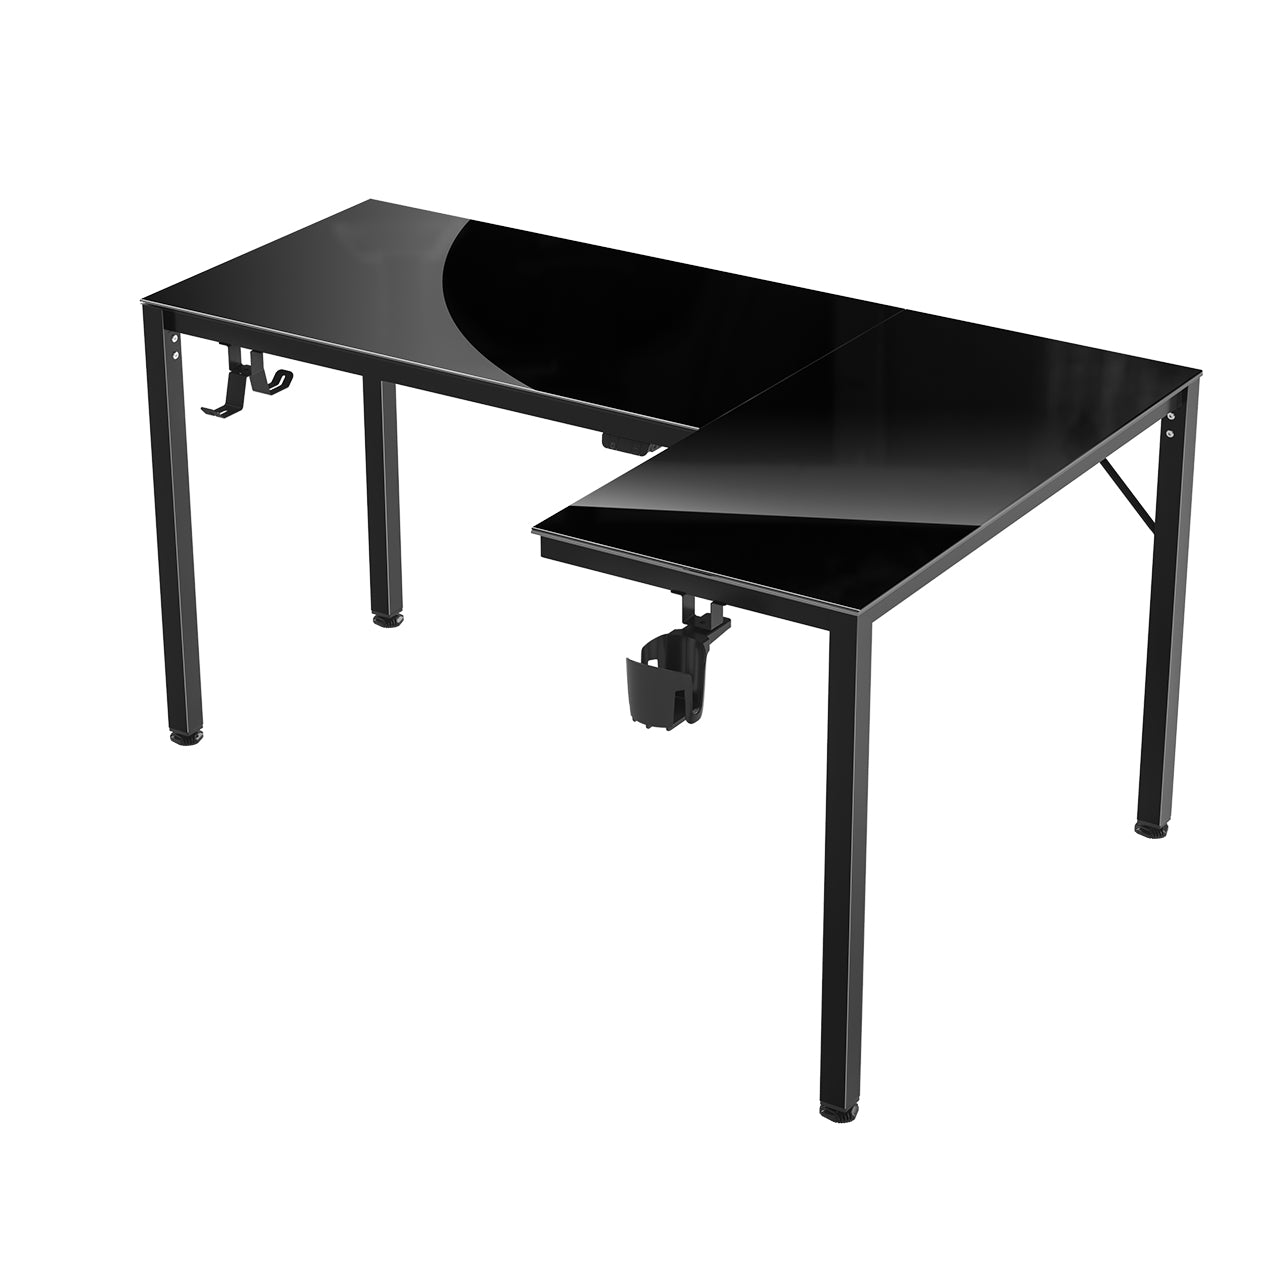 L60 Glass Gaming Desk, Black-colored, Right Sided, Eureka Ergonomic, Tempered Glass, RGB Gaming Desk, RGB Lights Off, Product Image